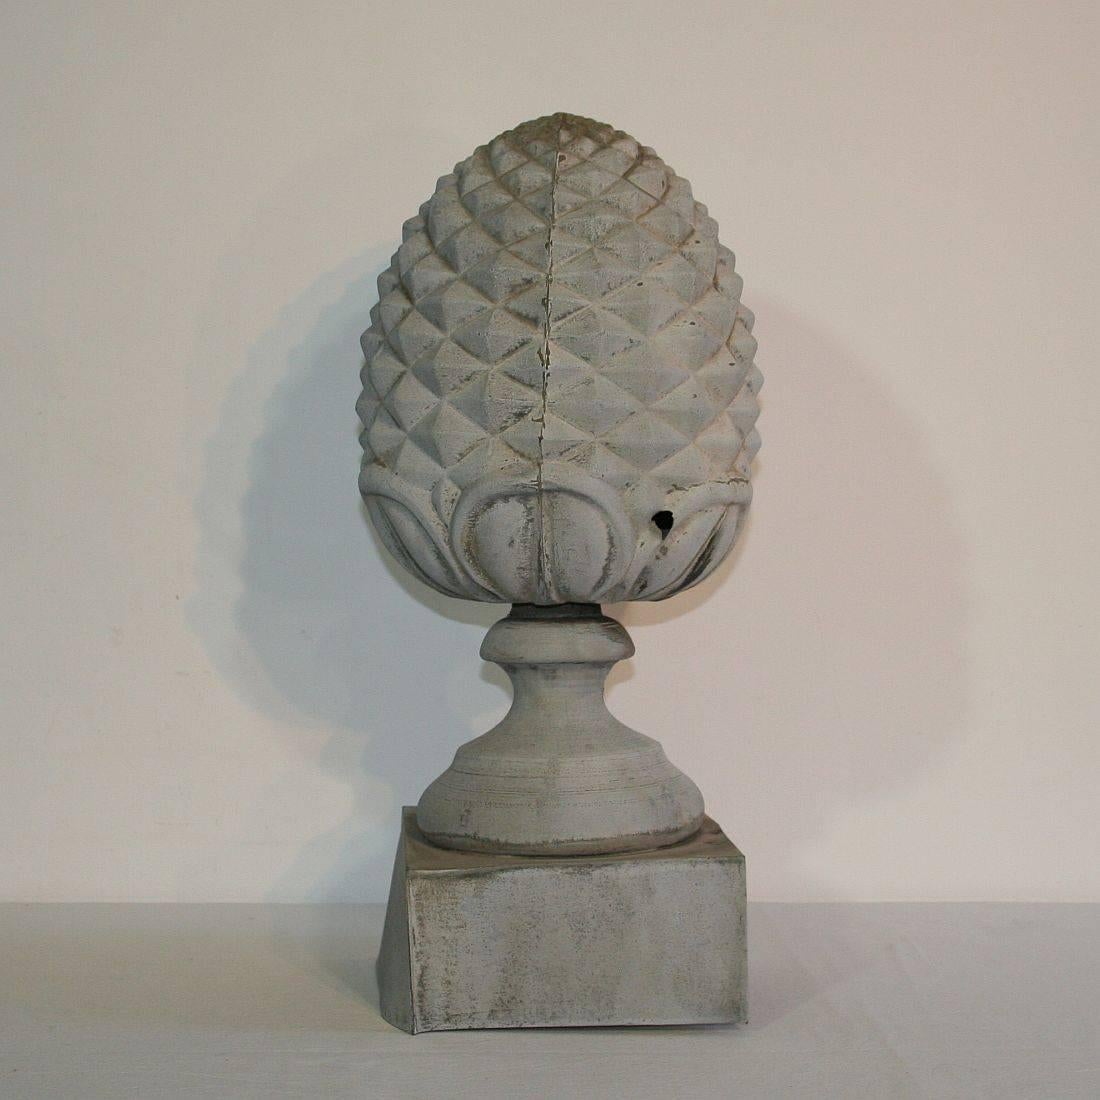 Very rare and beautiful zinc pine cone roof finial, France, circa 1850-1900. Weathered.